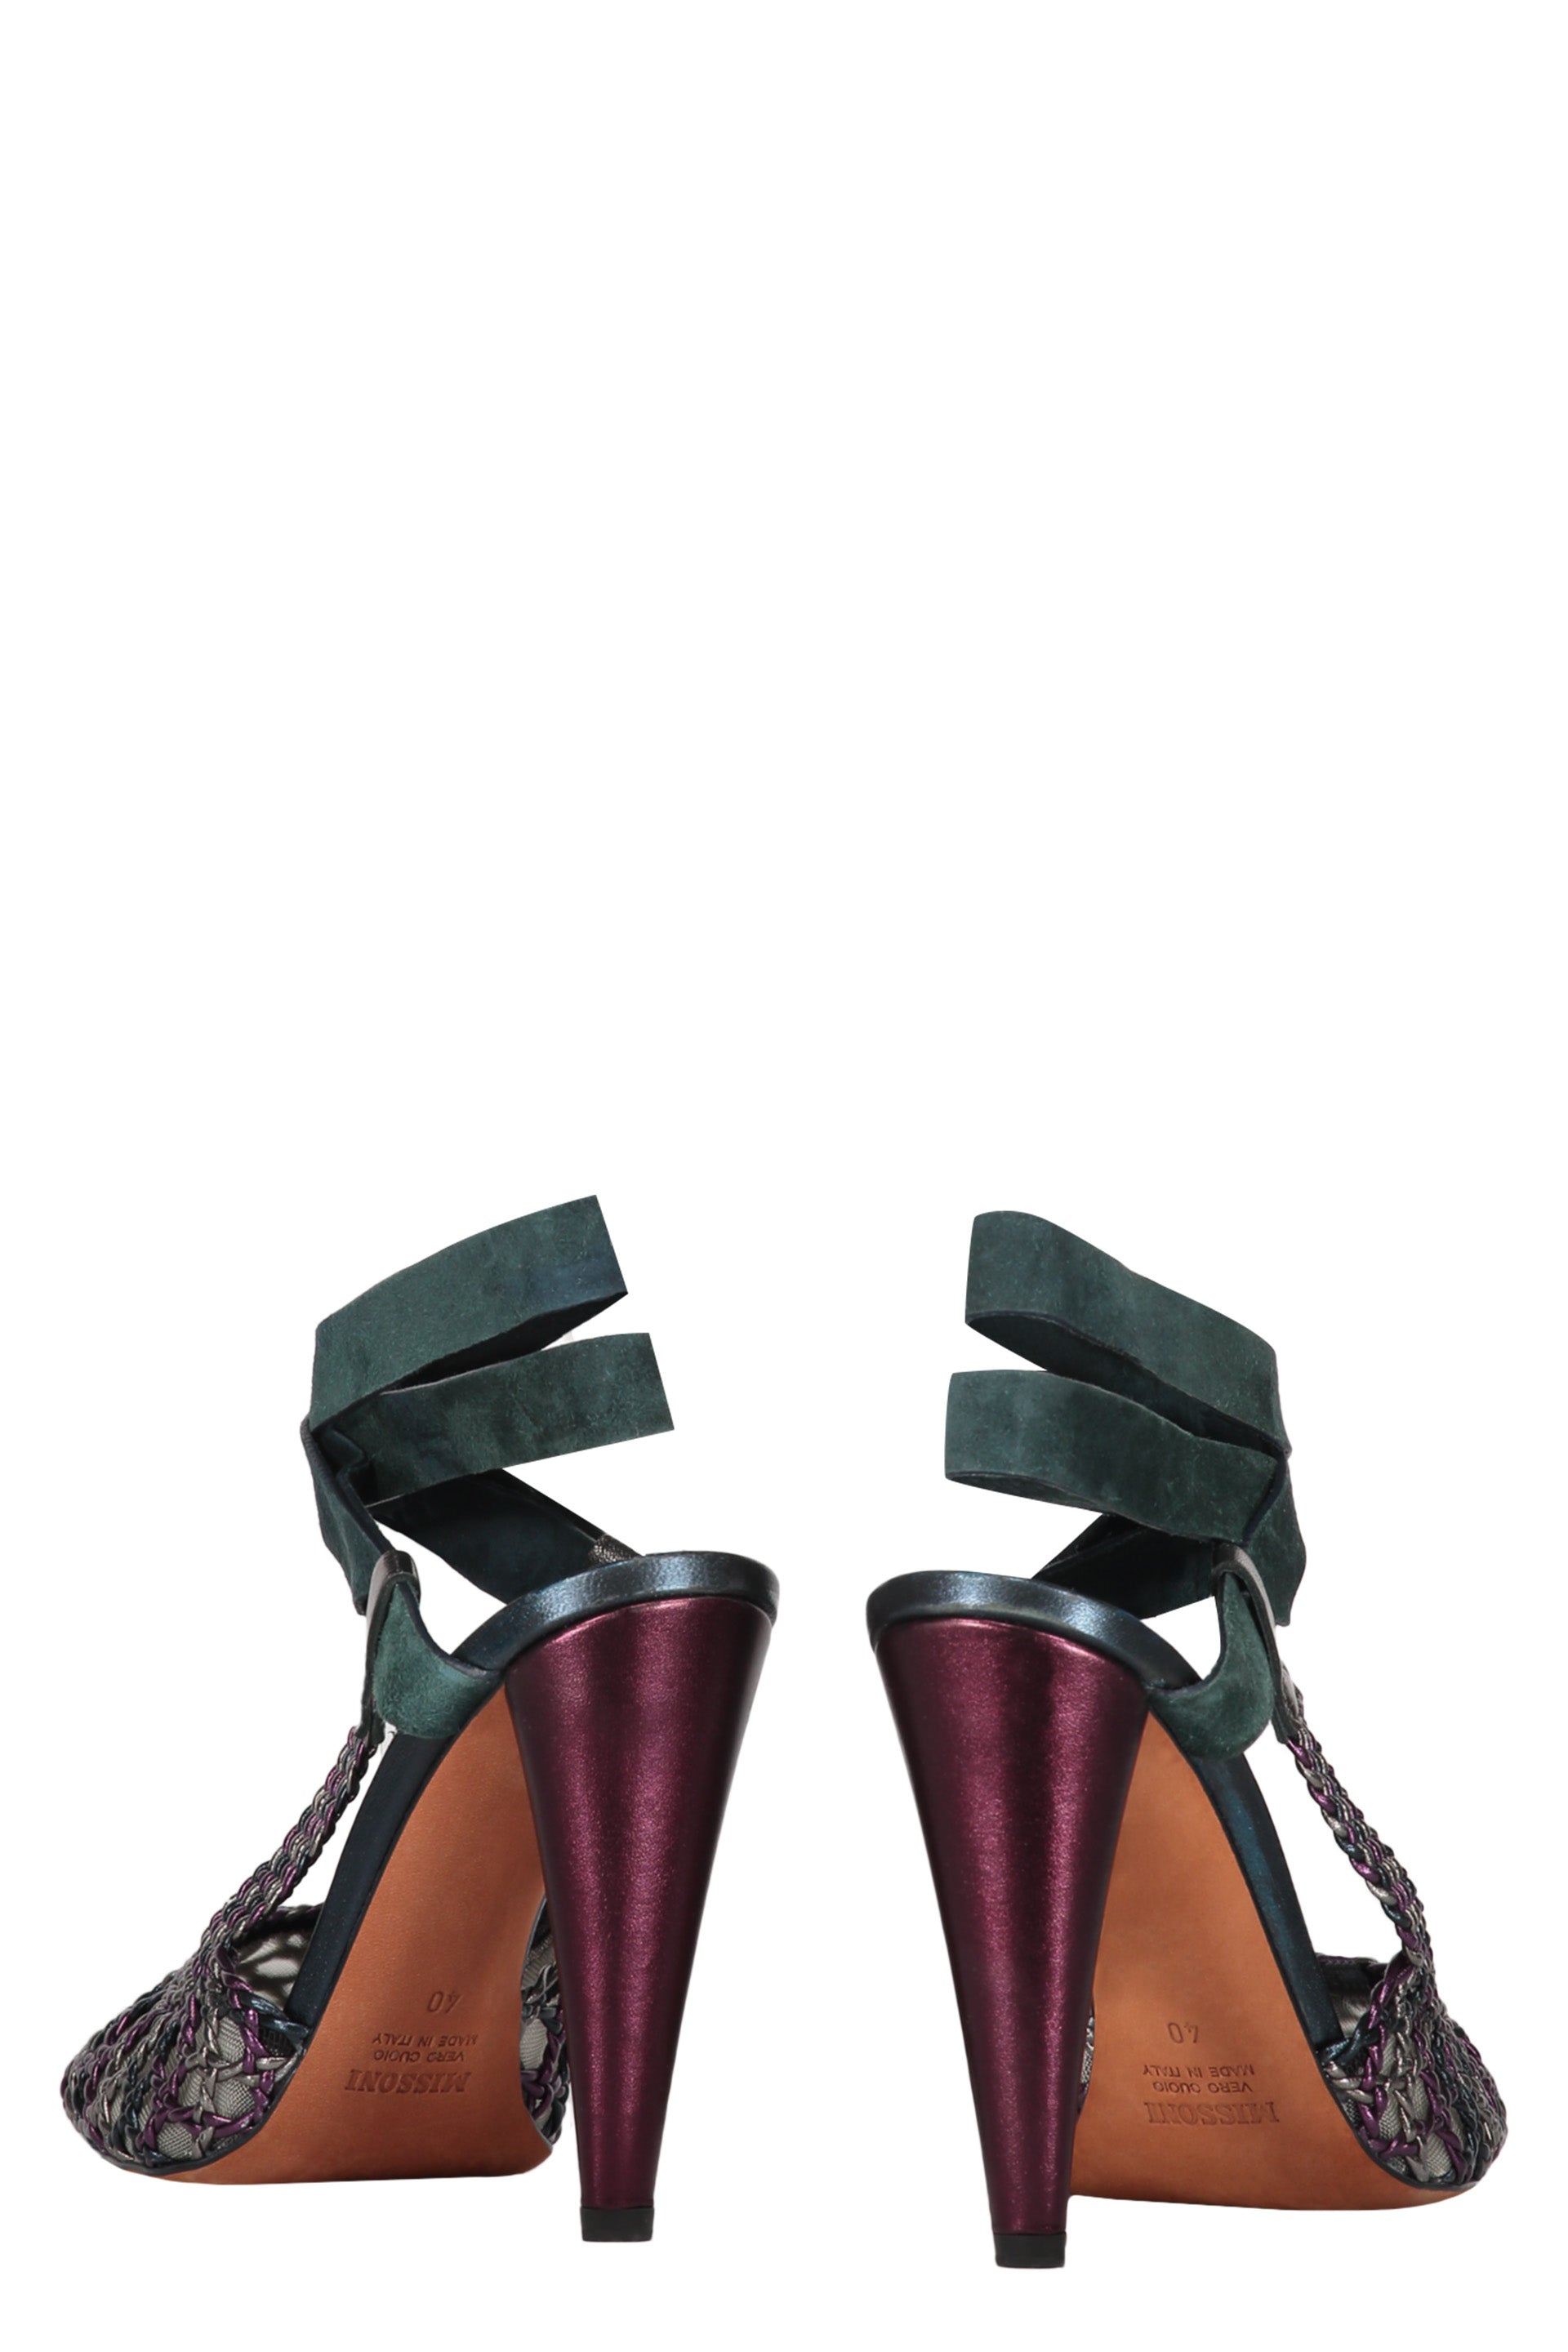 Missoni-OUTLET-SALE-Heeled-leather-sandals-Sandalen-40-ARCHIVE-COLLECTION-3.jpg